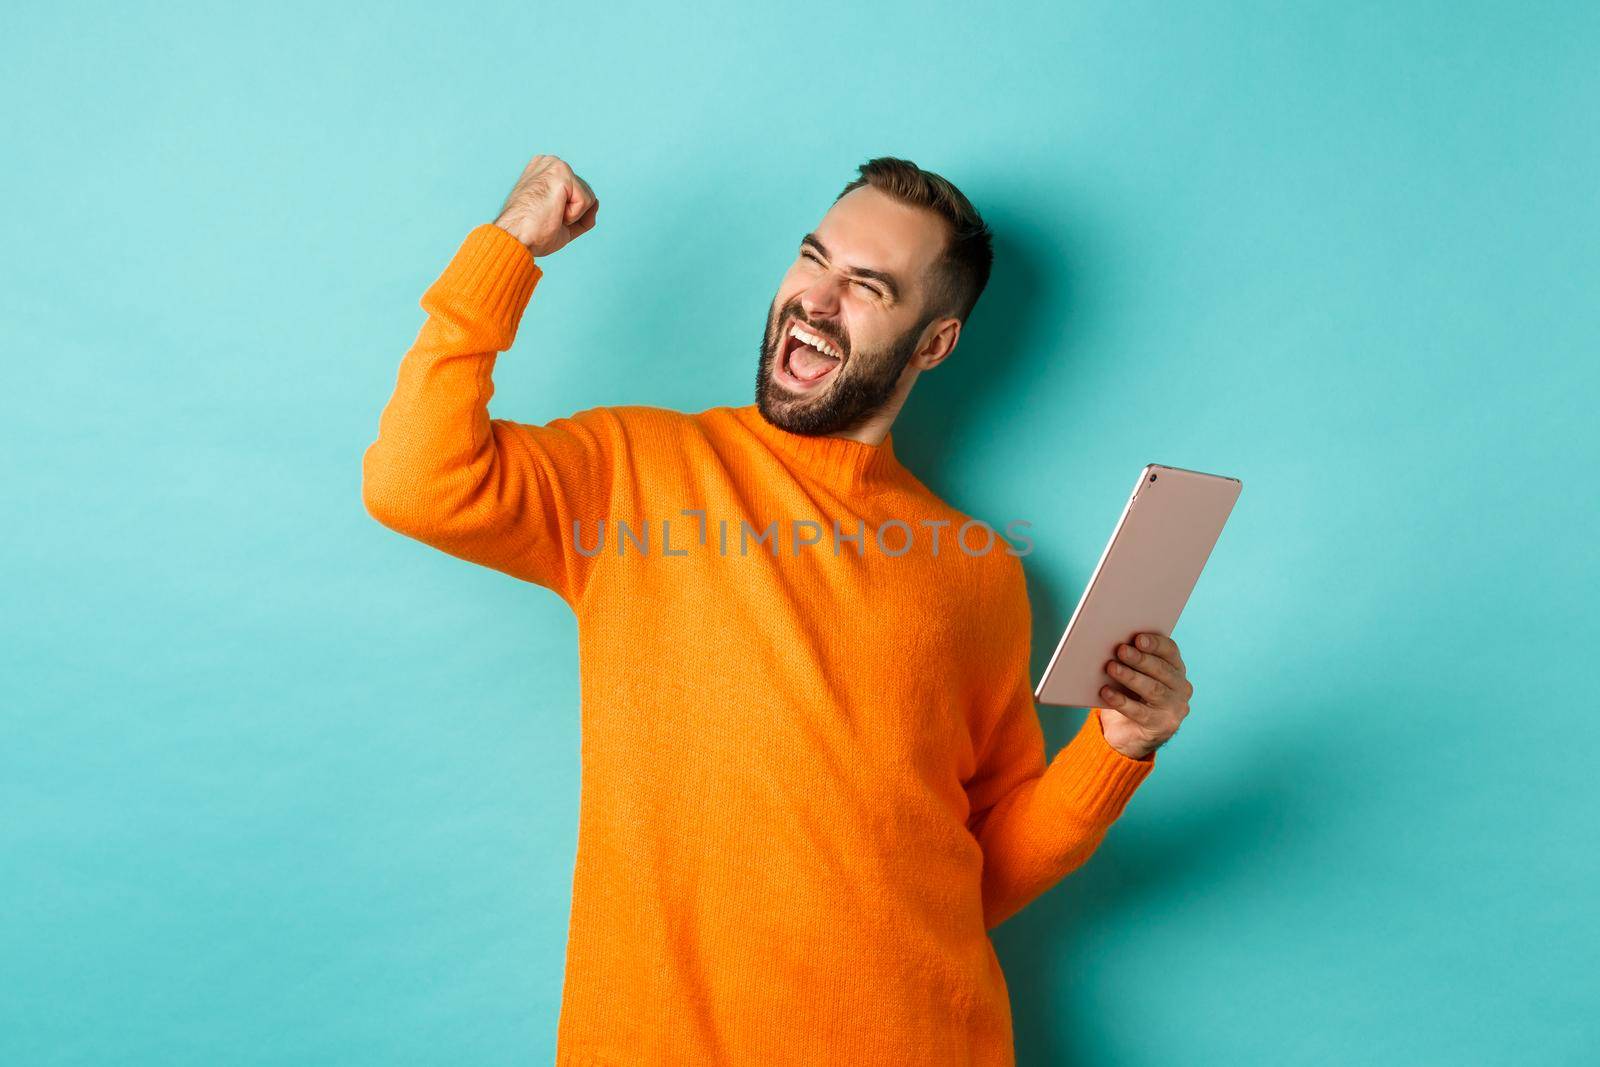 Cheerful winning man holding digital tablet, rejoicing and celebrating victory in game, making fist pump gesture, standing over light blue background.